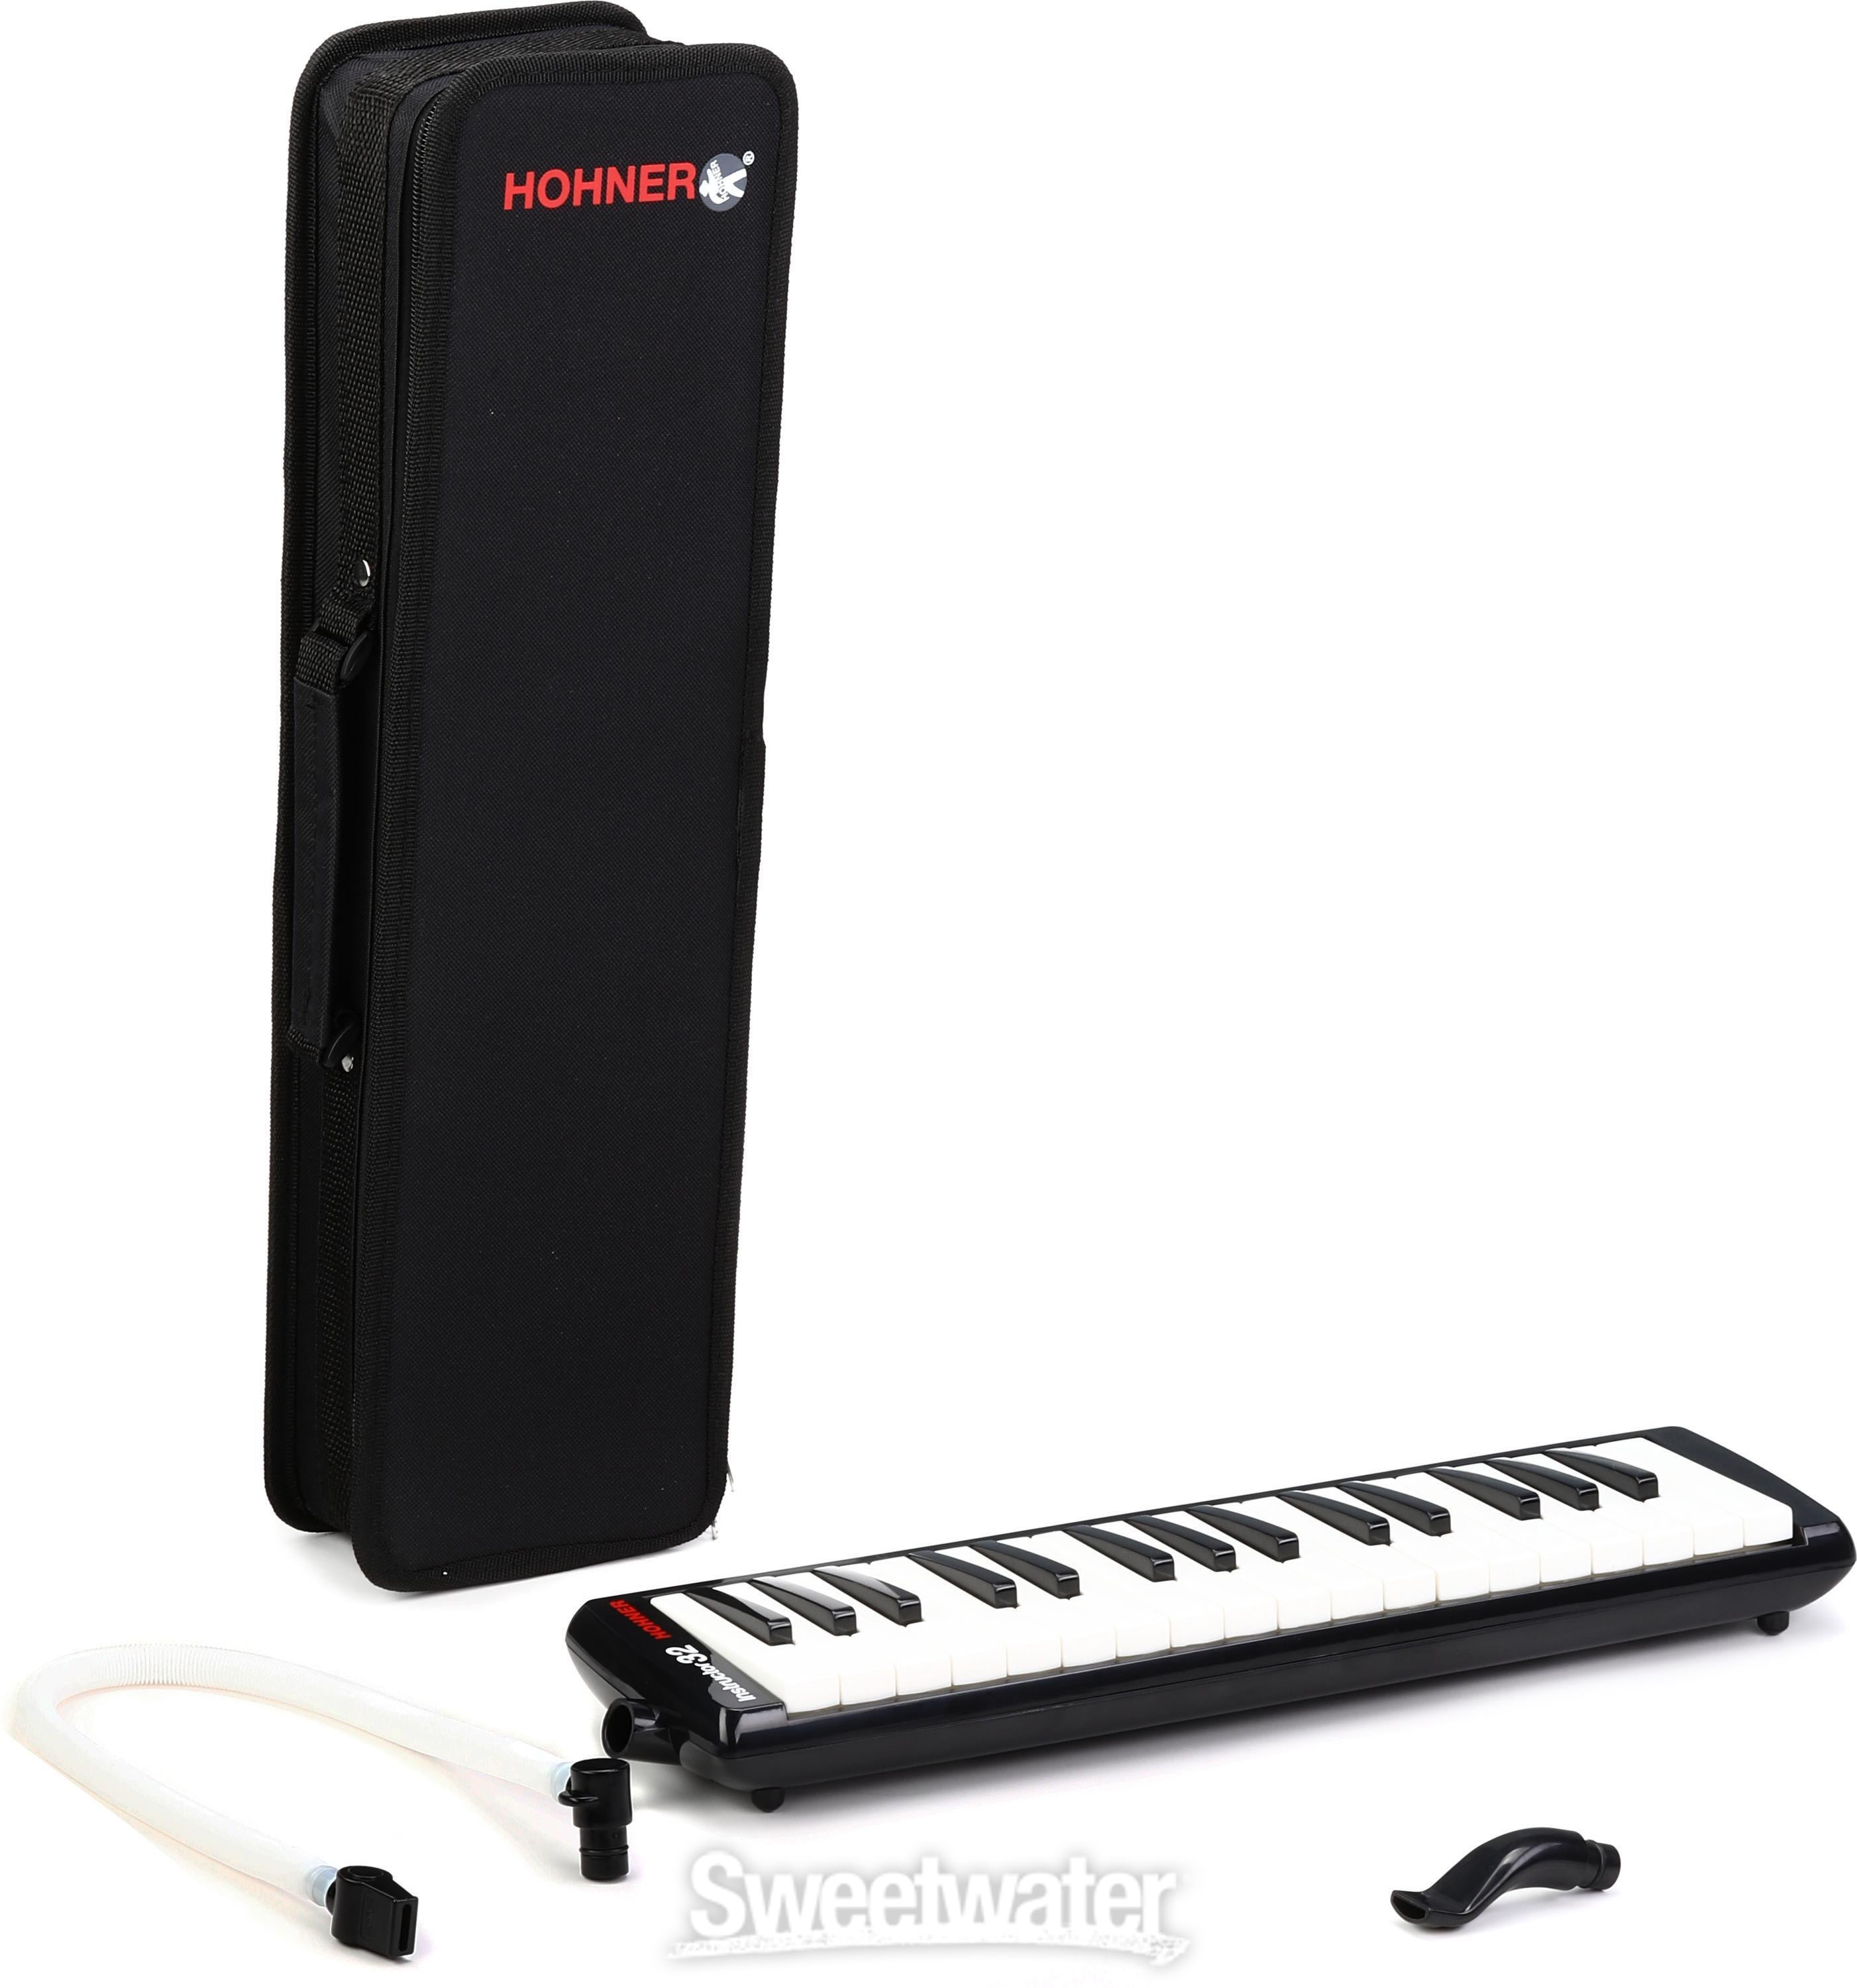 Hohner Student 32-key Melodica - Black | Sweetwater